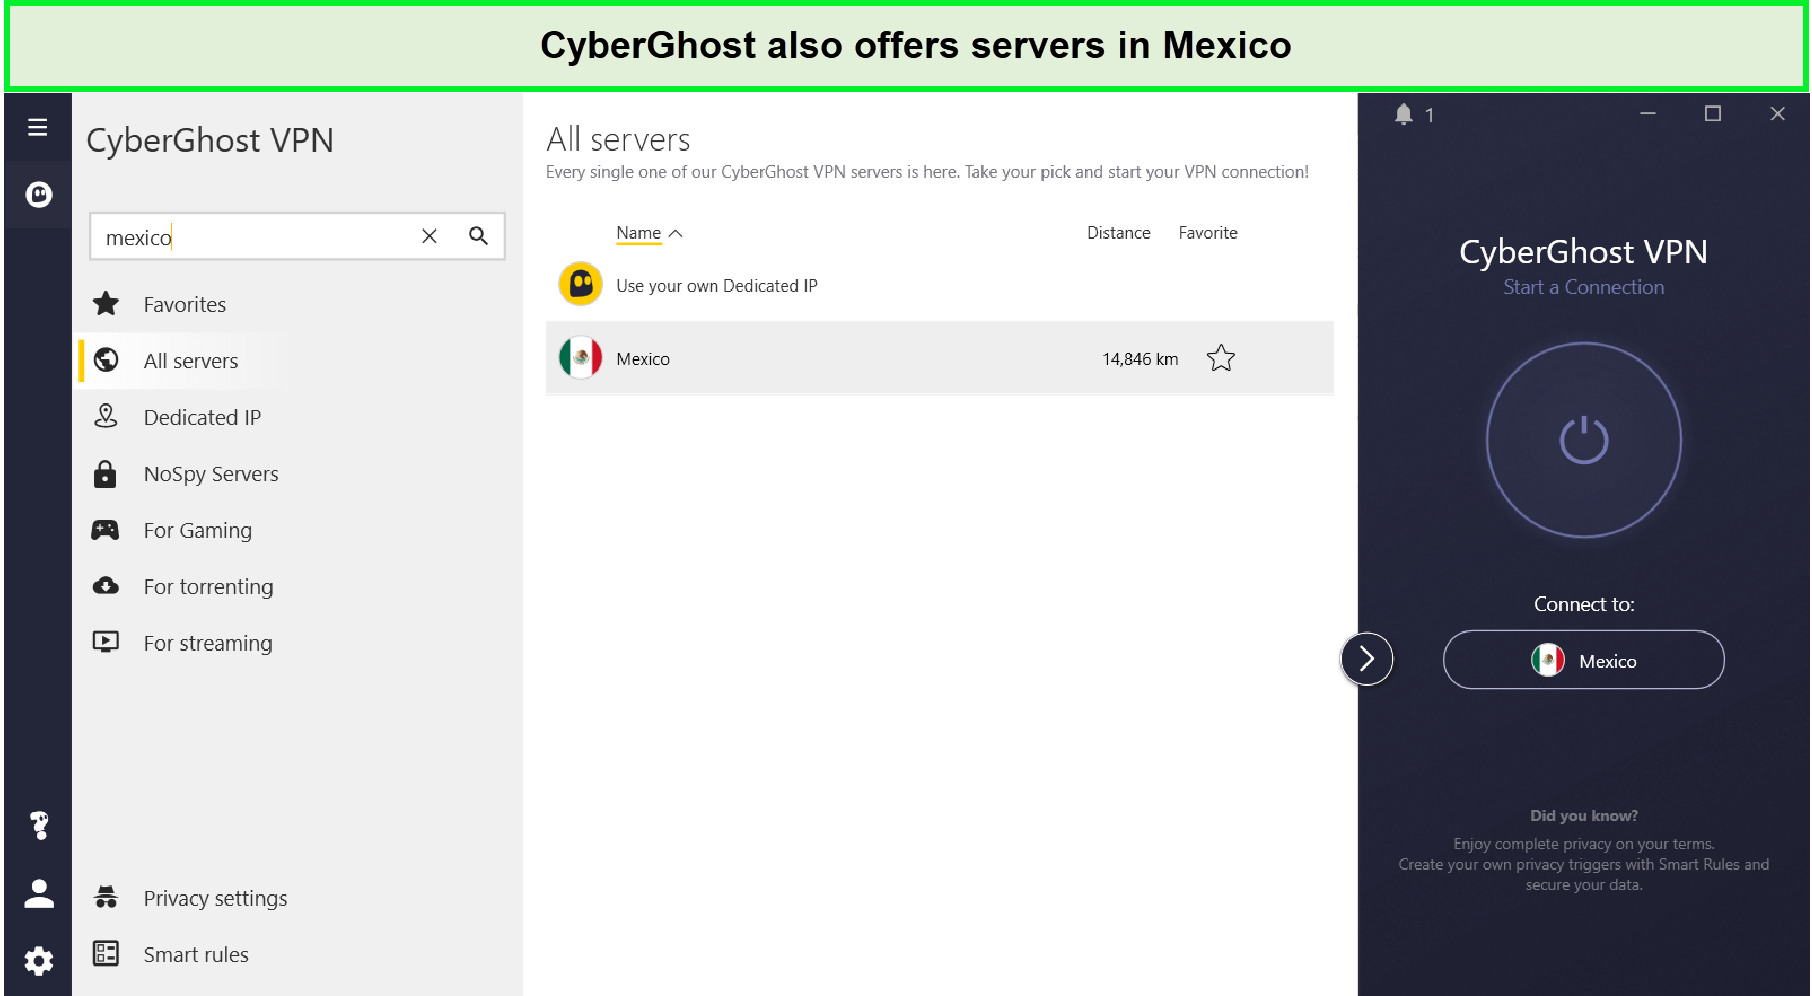 cyberghost-vpn-mexico-servers-For France Users